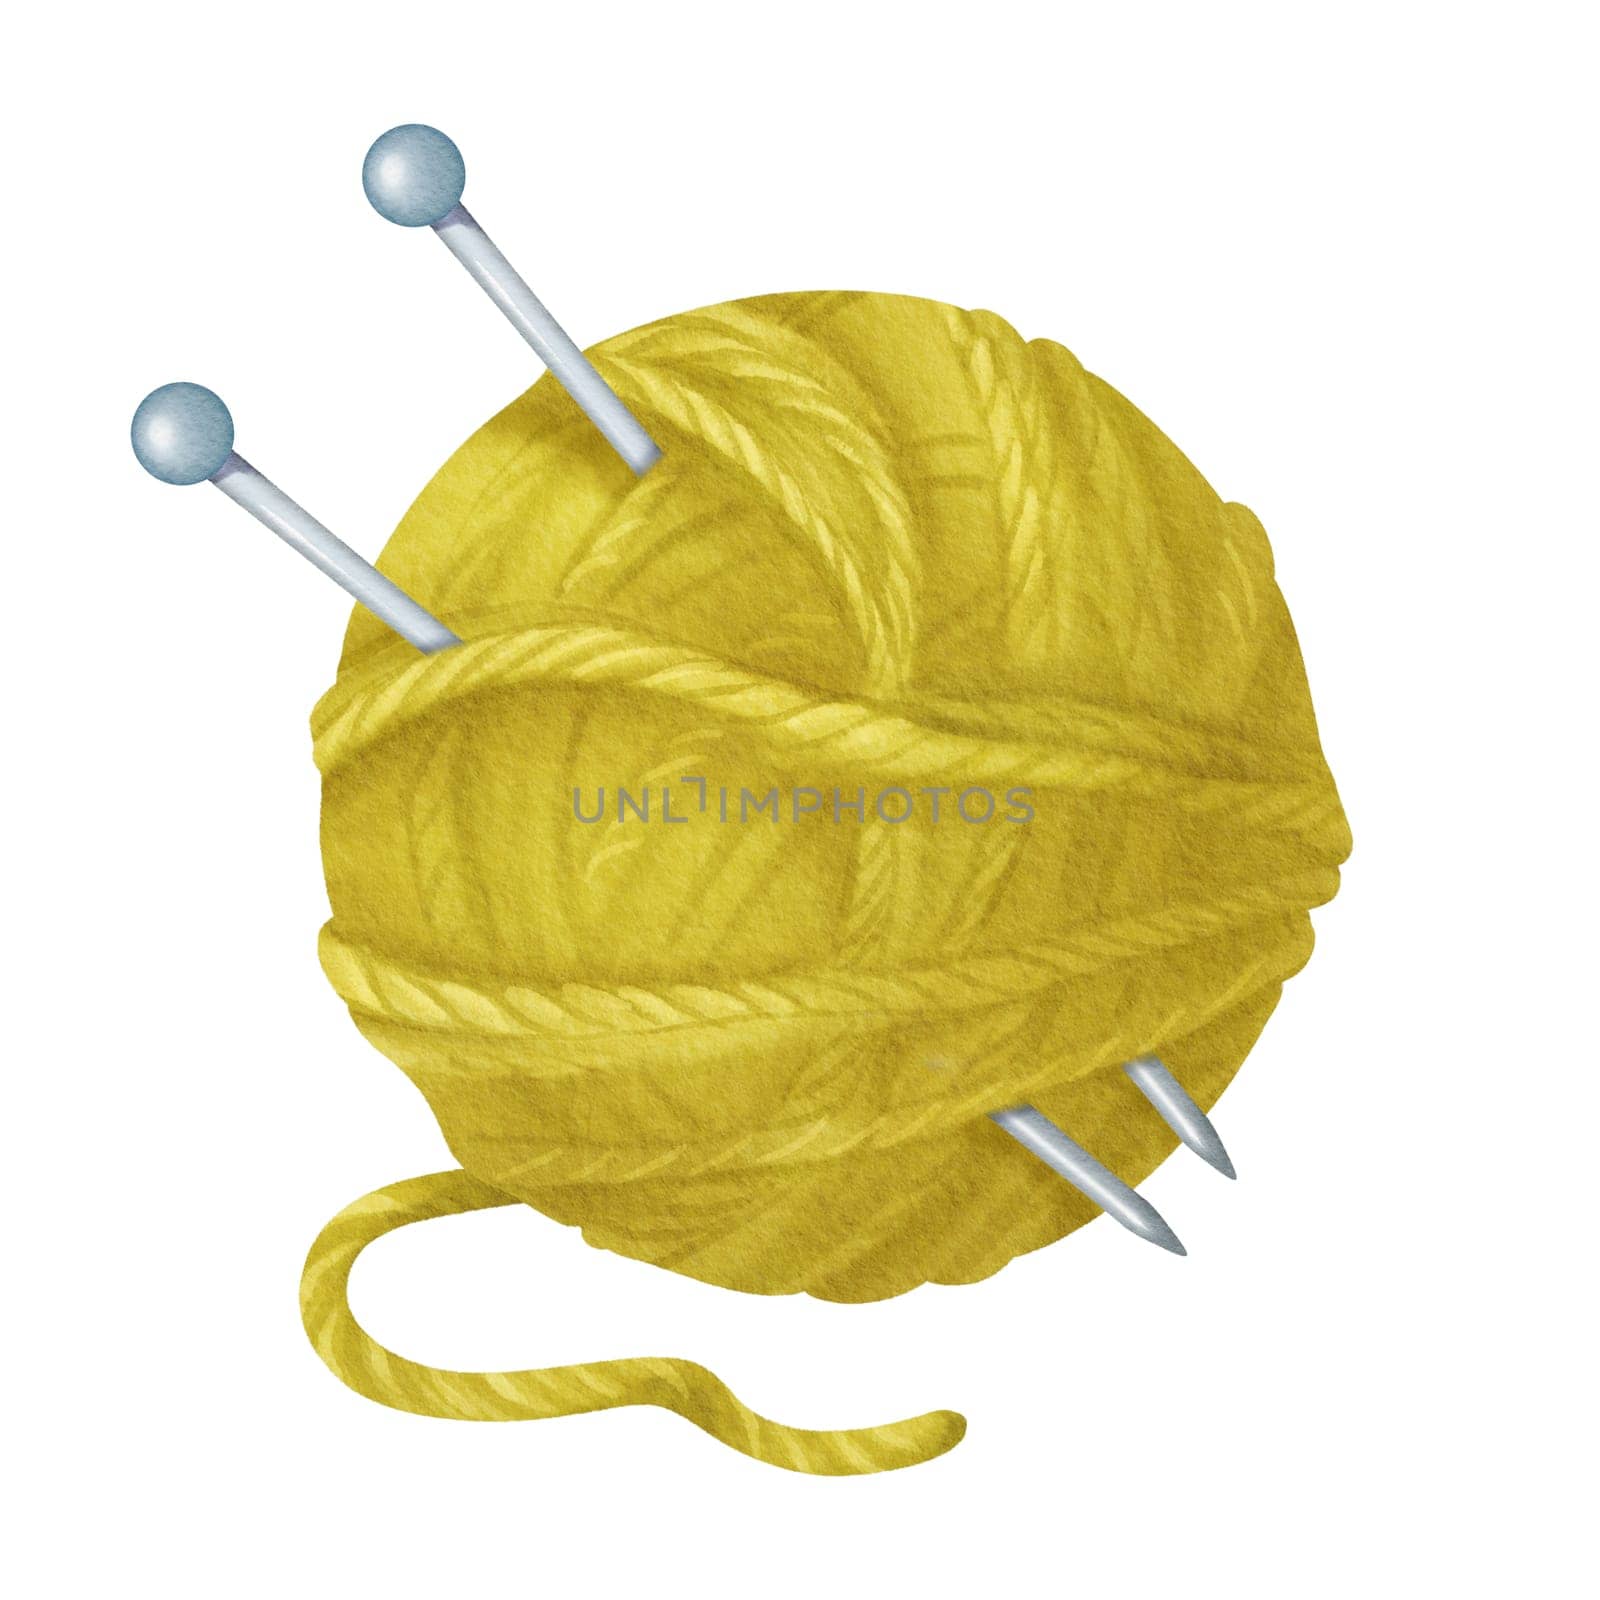 An isolated watercolor illustration featuring a green yarn spool. Embedded in the spool are steel knitting needles. wool and cotton. for crafting enthusiasts, knitting tutorials, DIY-themed designs by Art_Mari_Ka